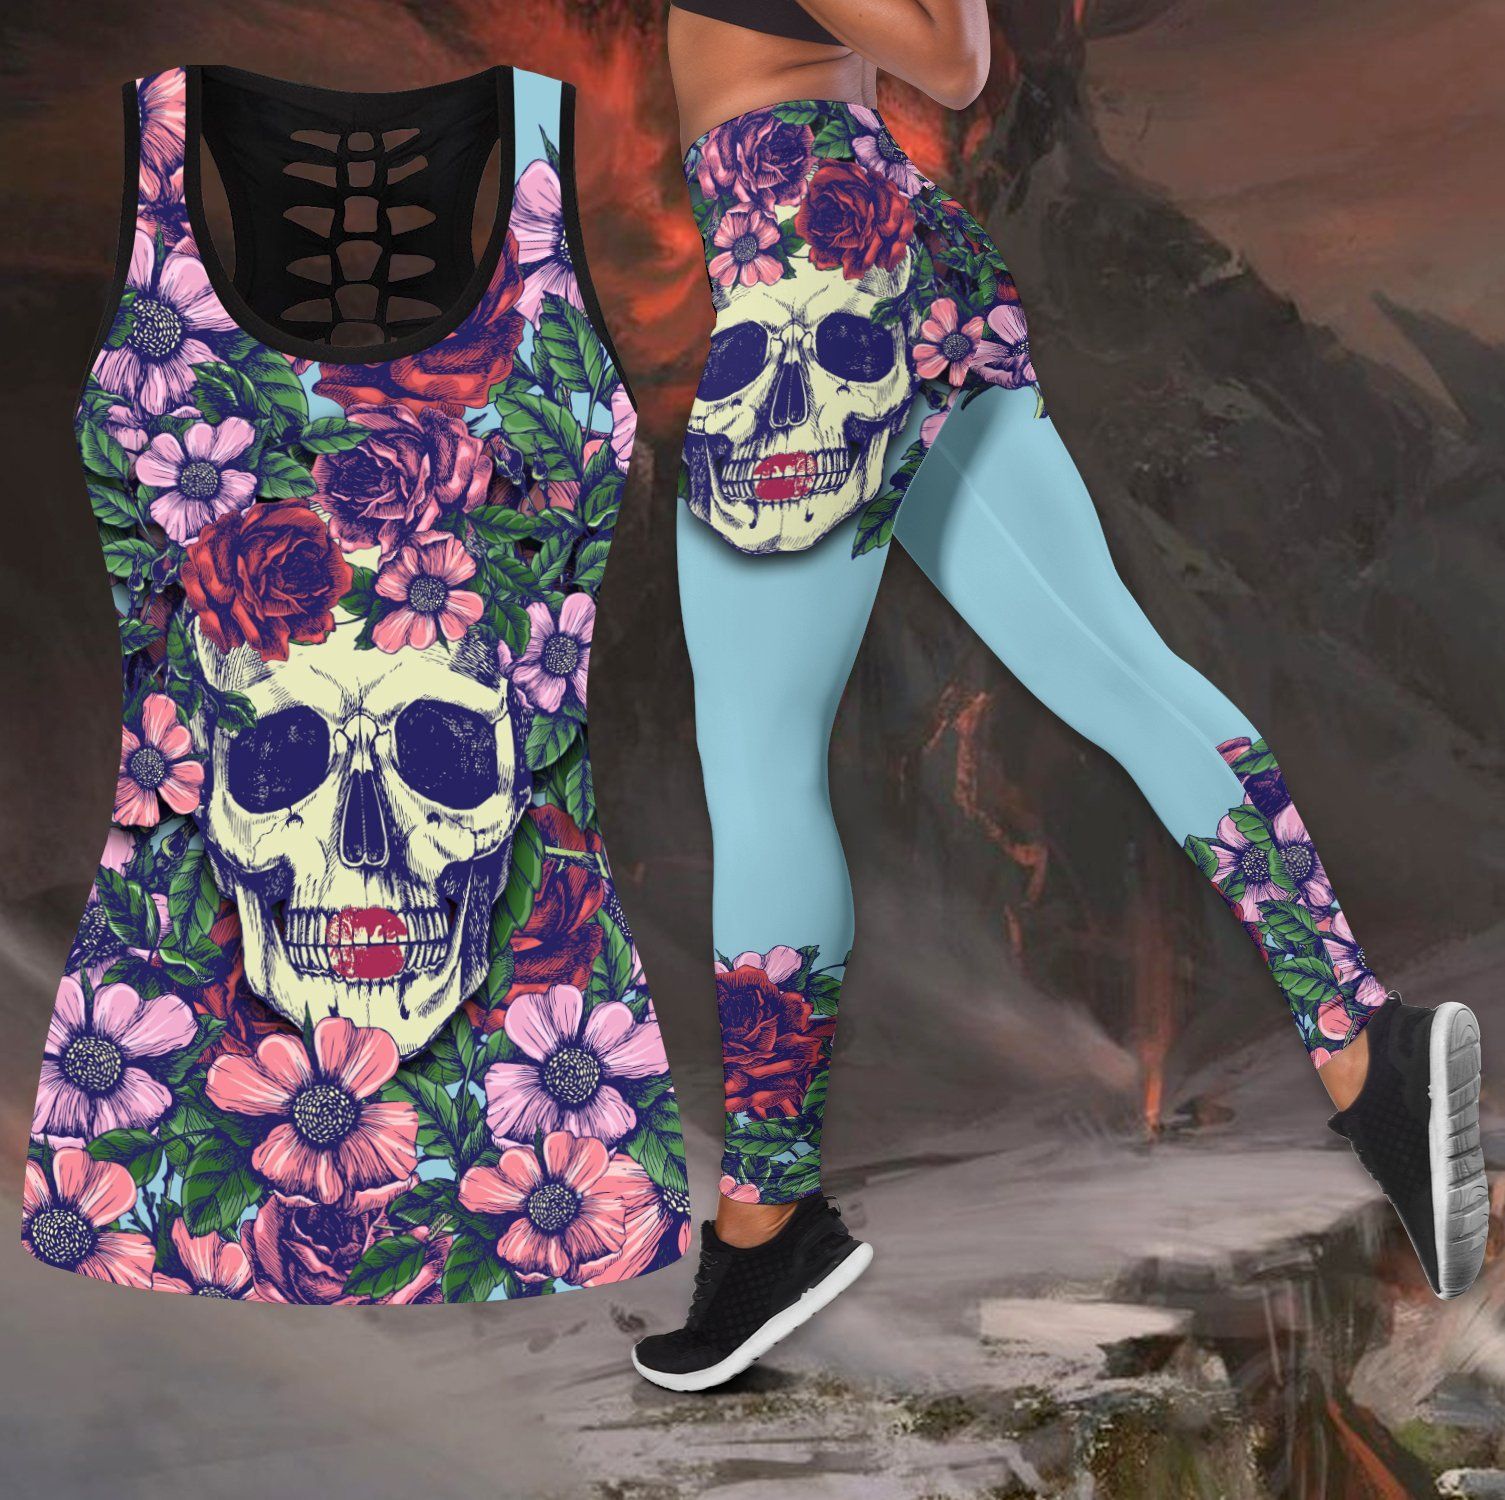 Butterfly Love Skull and Tattoos tanktop & legging outfit for women QB05252004